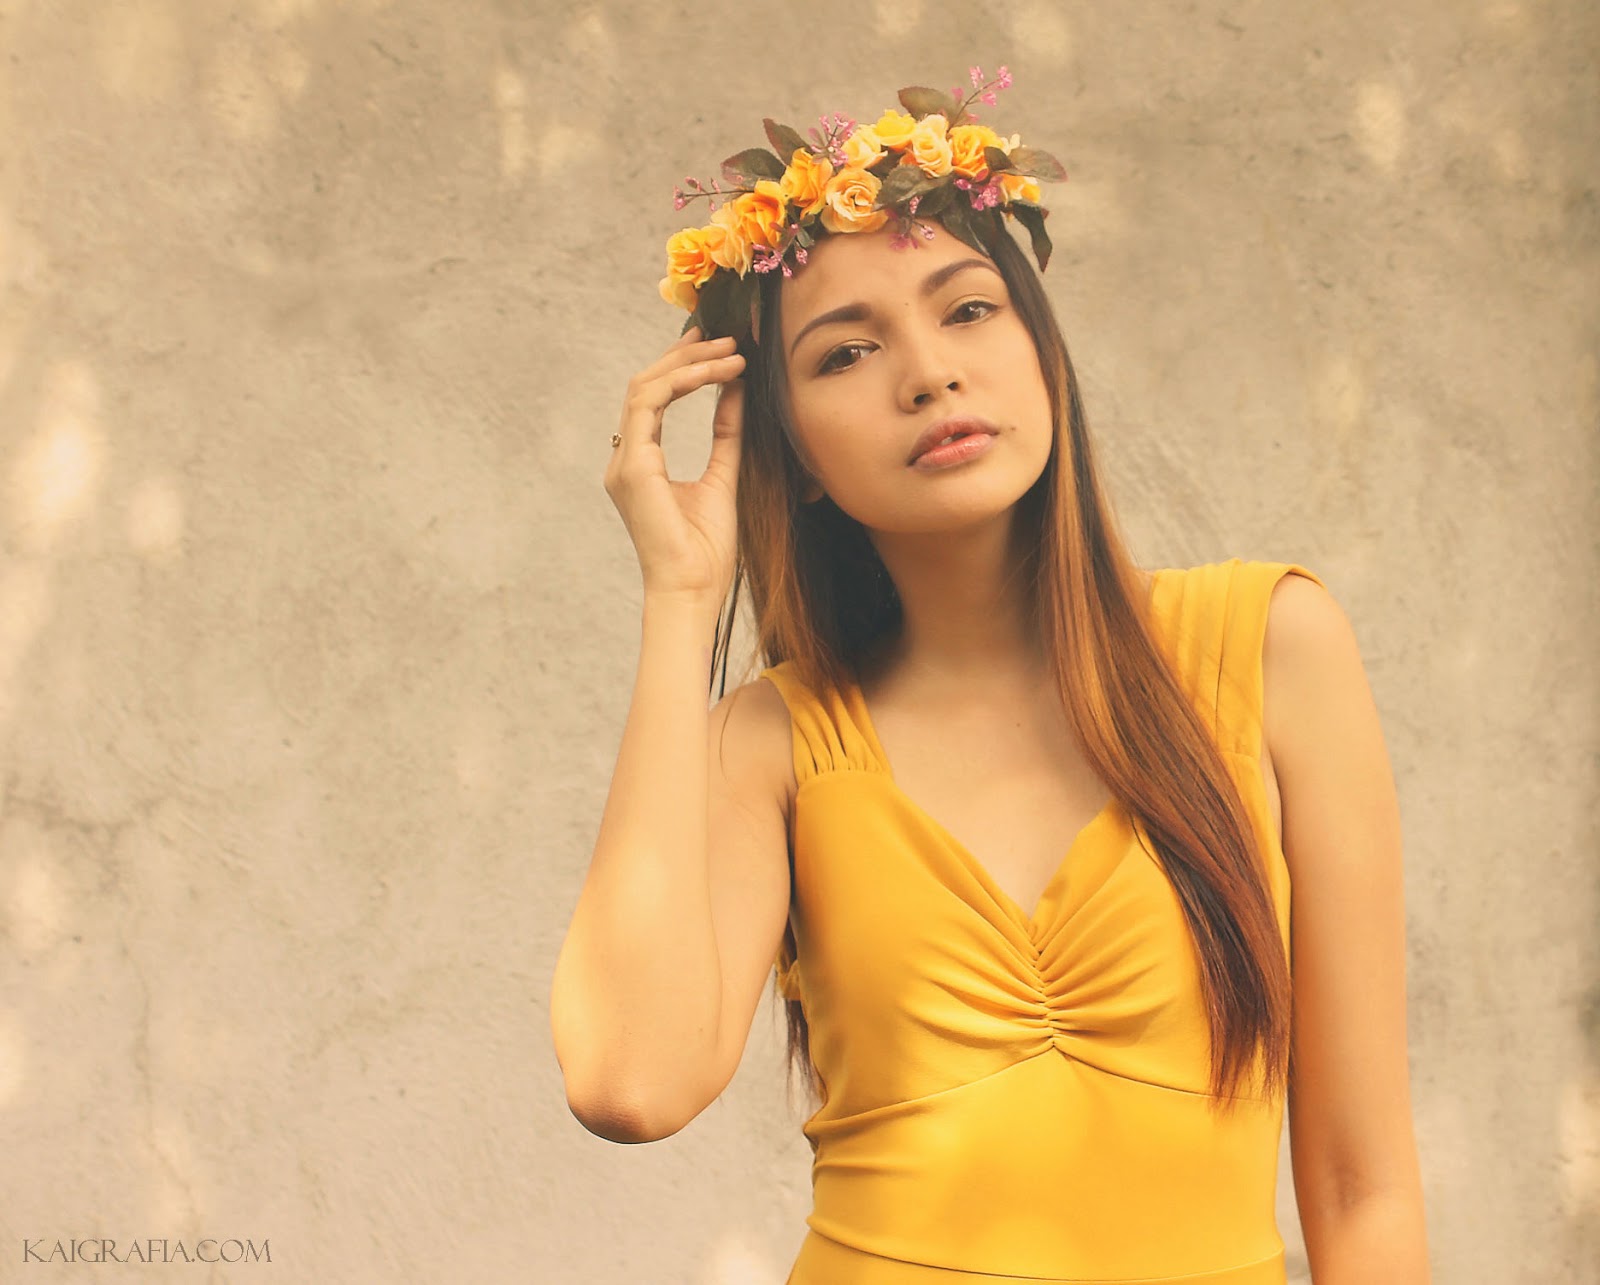 how to wear yellow dress and flower crowns